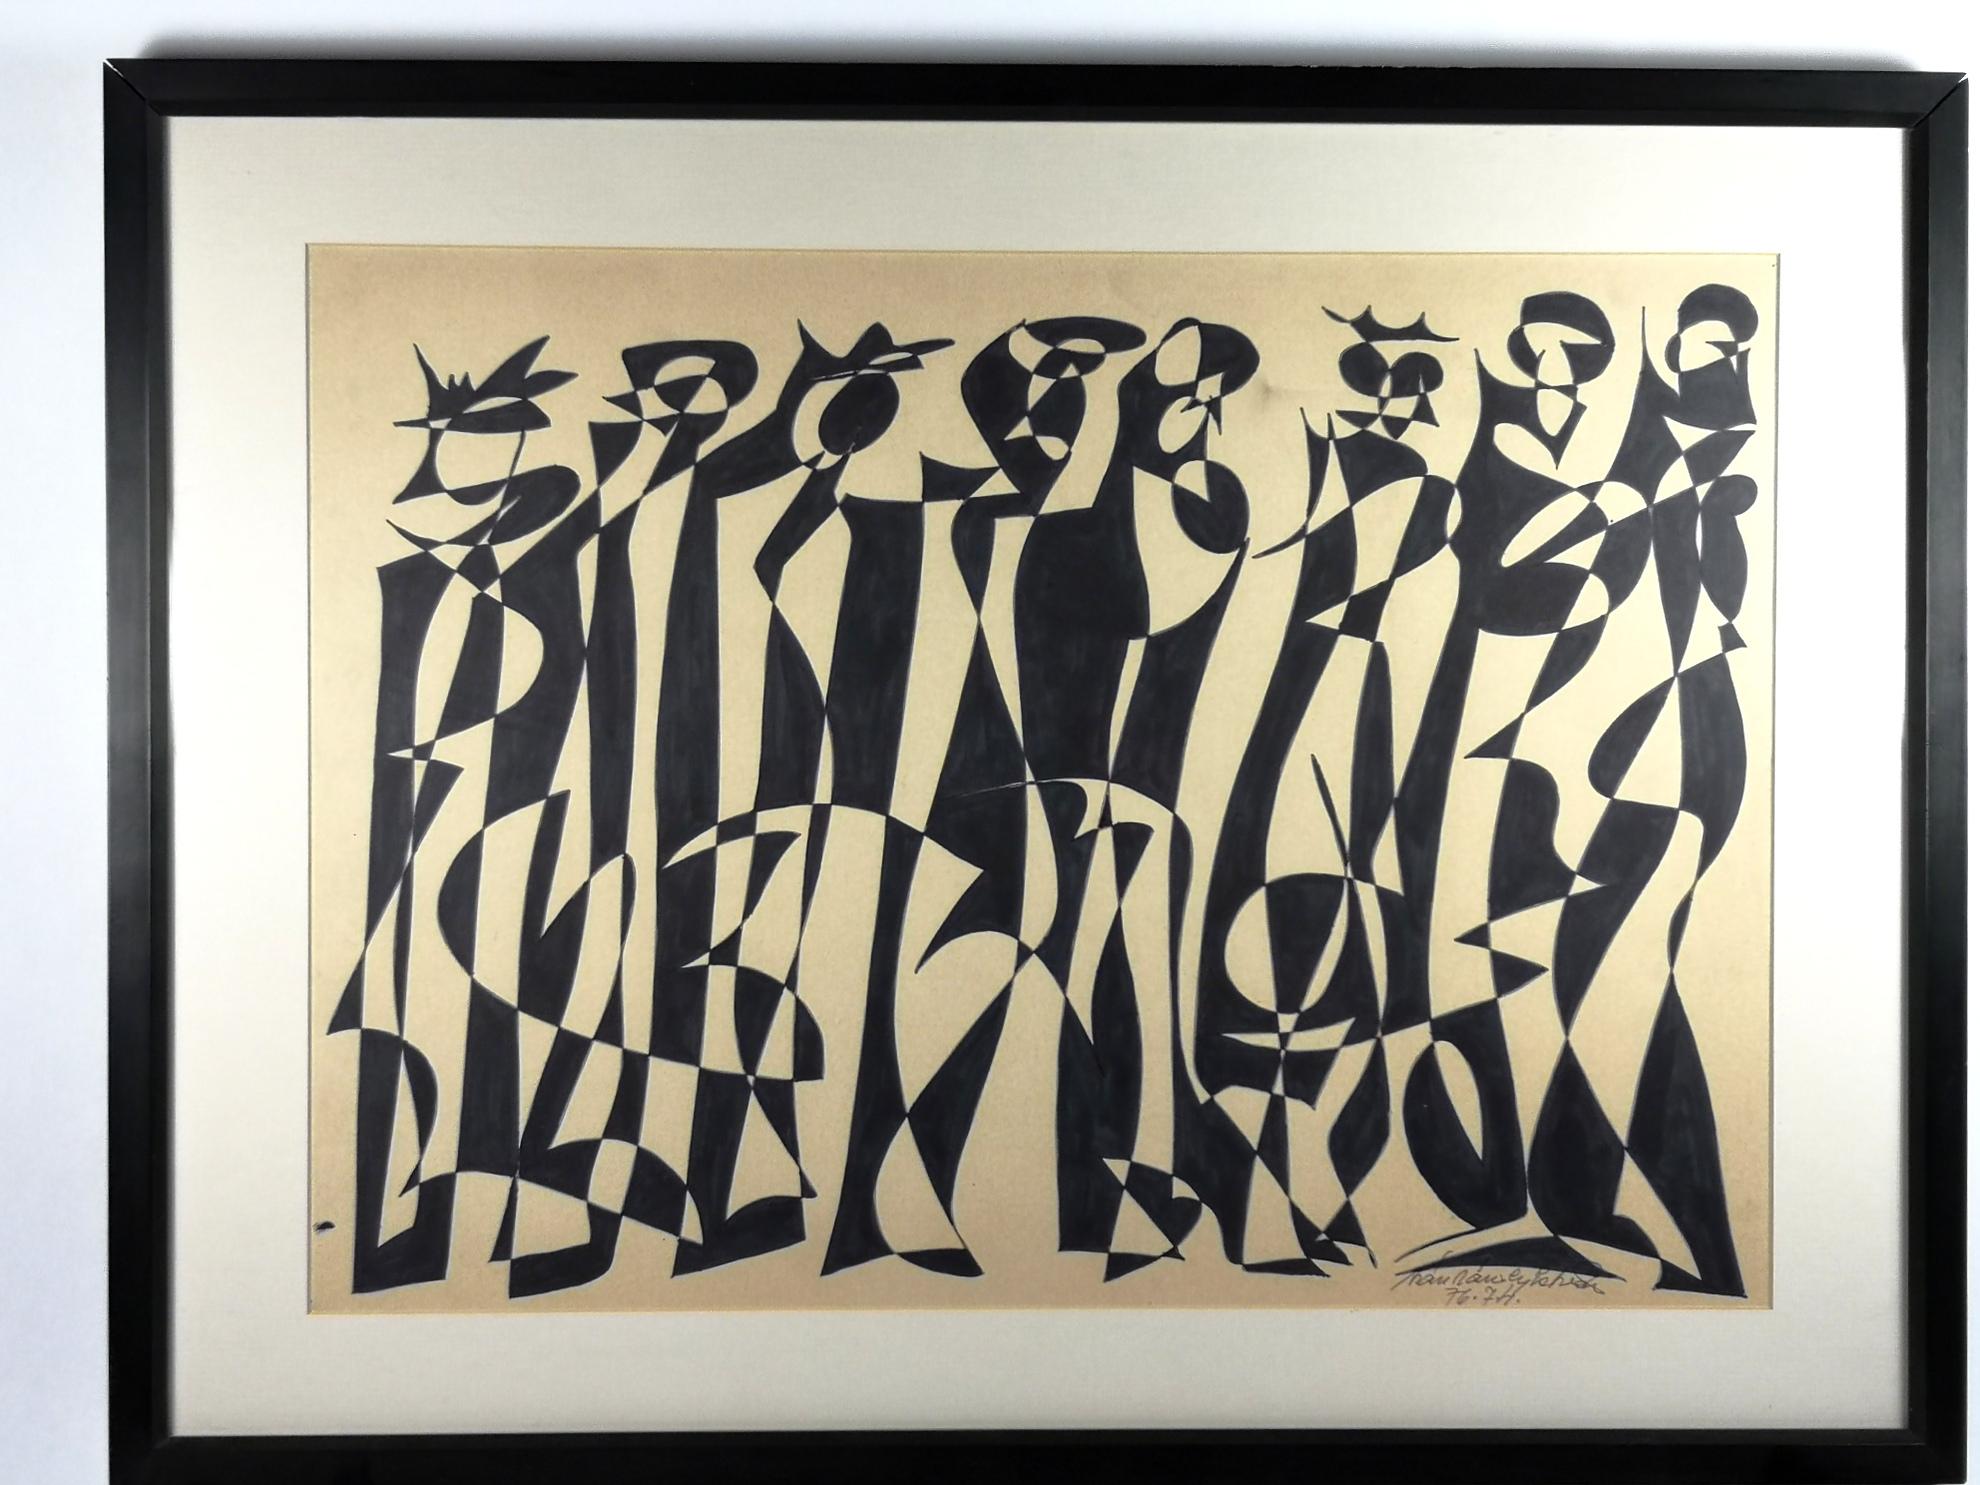 Dancers is an original ink on paper work by Istvan Karoly Szasz. This ink-on-paper work is a representative piece of the 1960s-1970s op art movement in Hungary. The piece is signed and dated by the artist, is framed and in great condition. Original